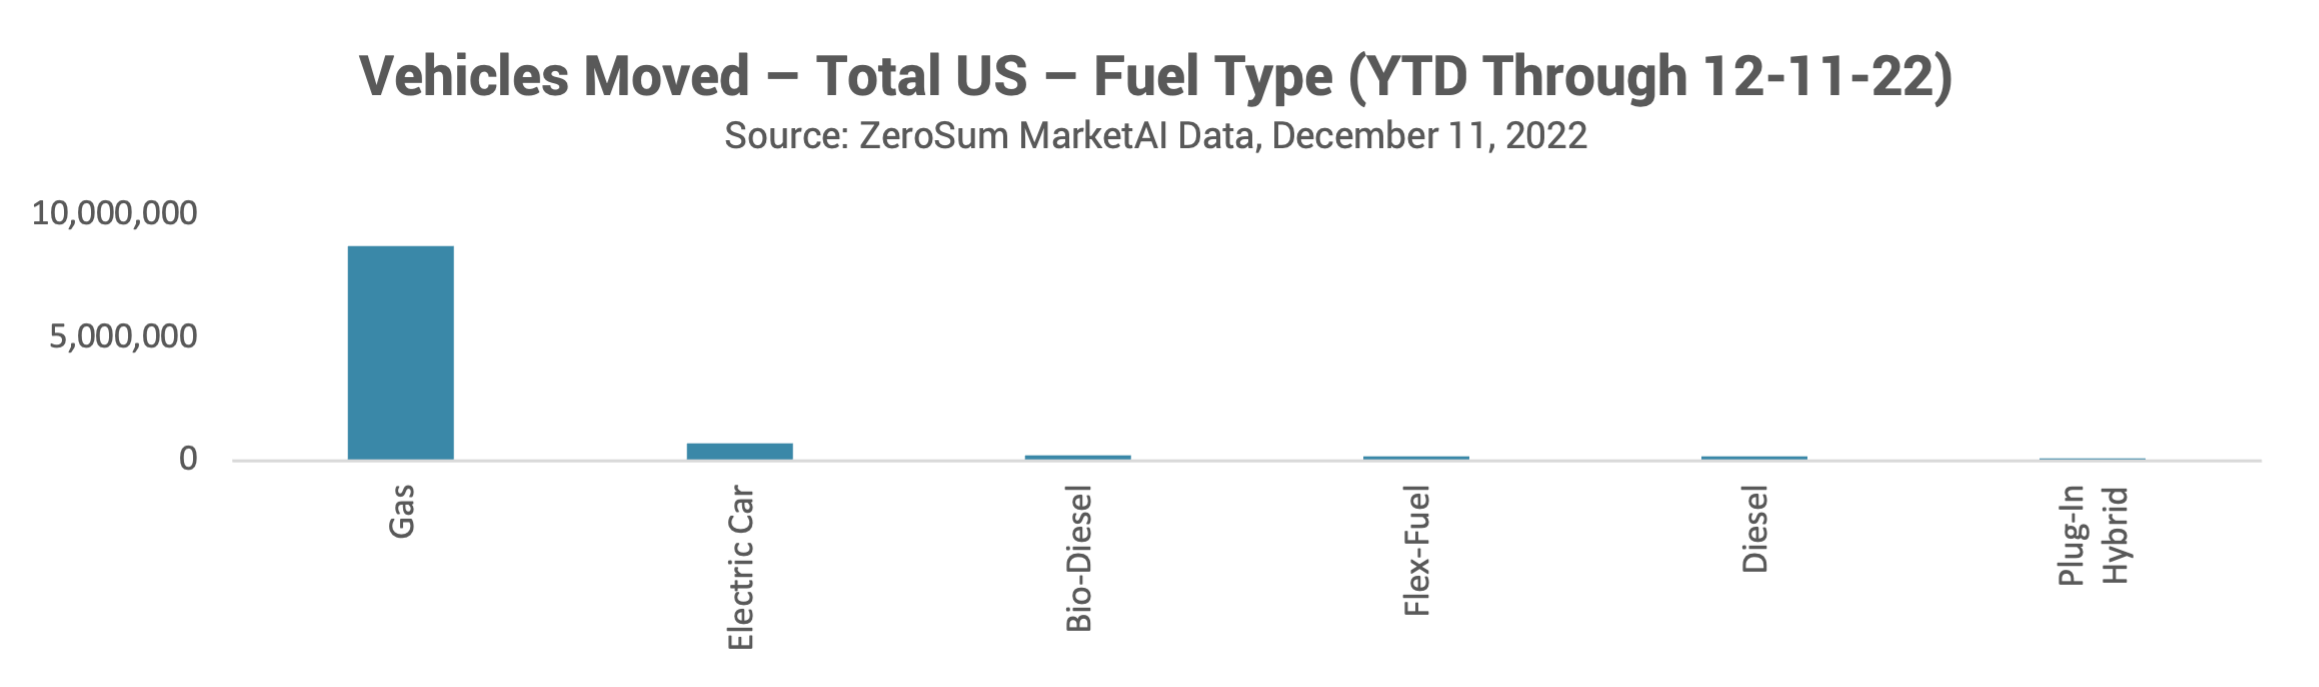 Vehicles Moved Total US Fuel Type